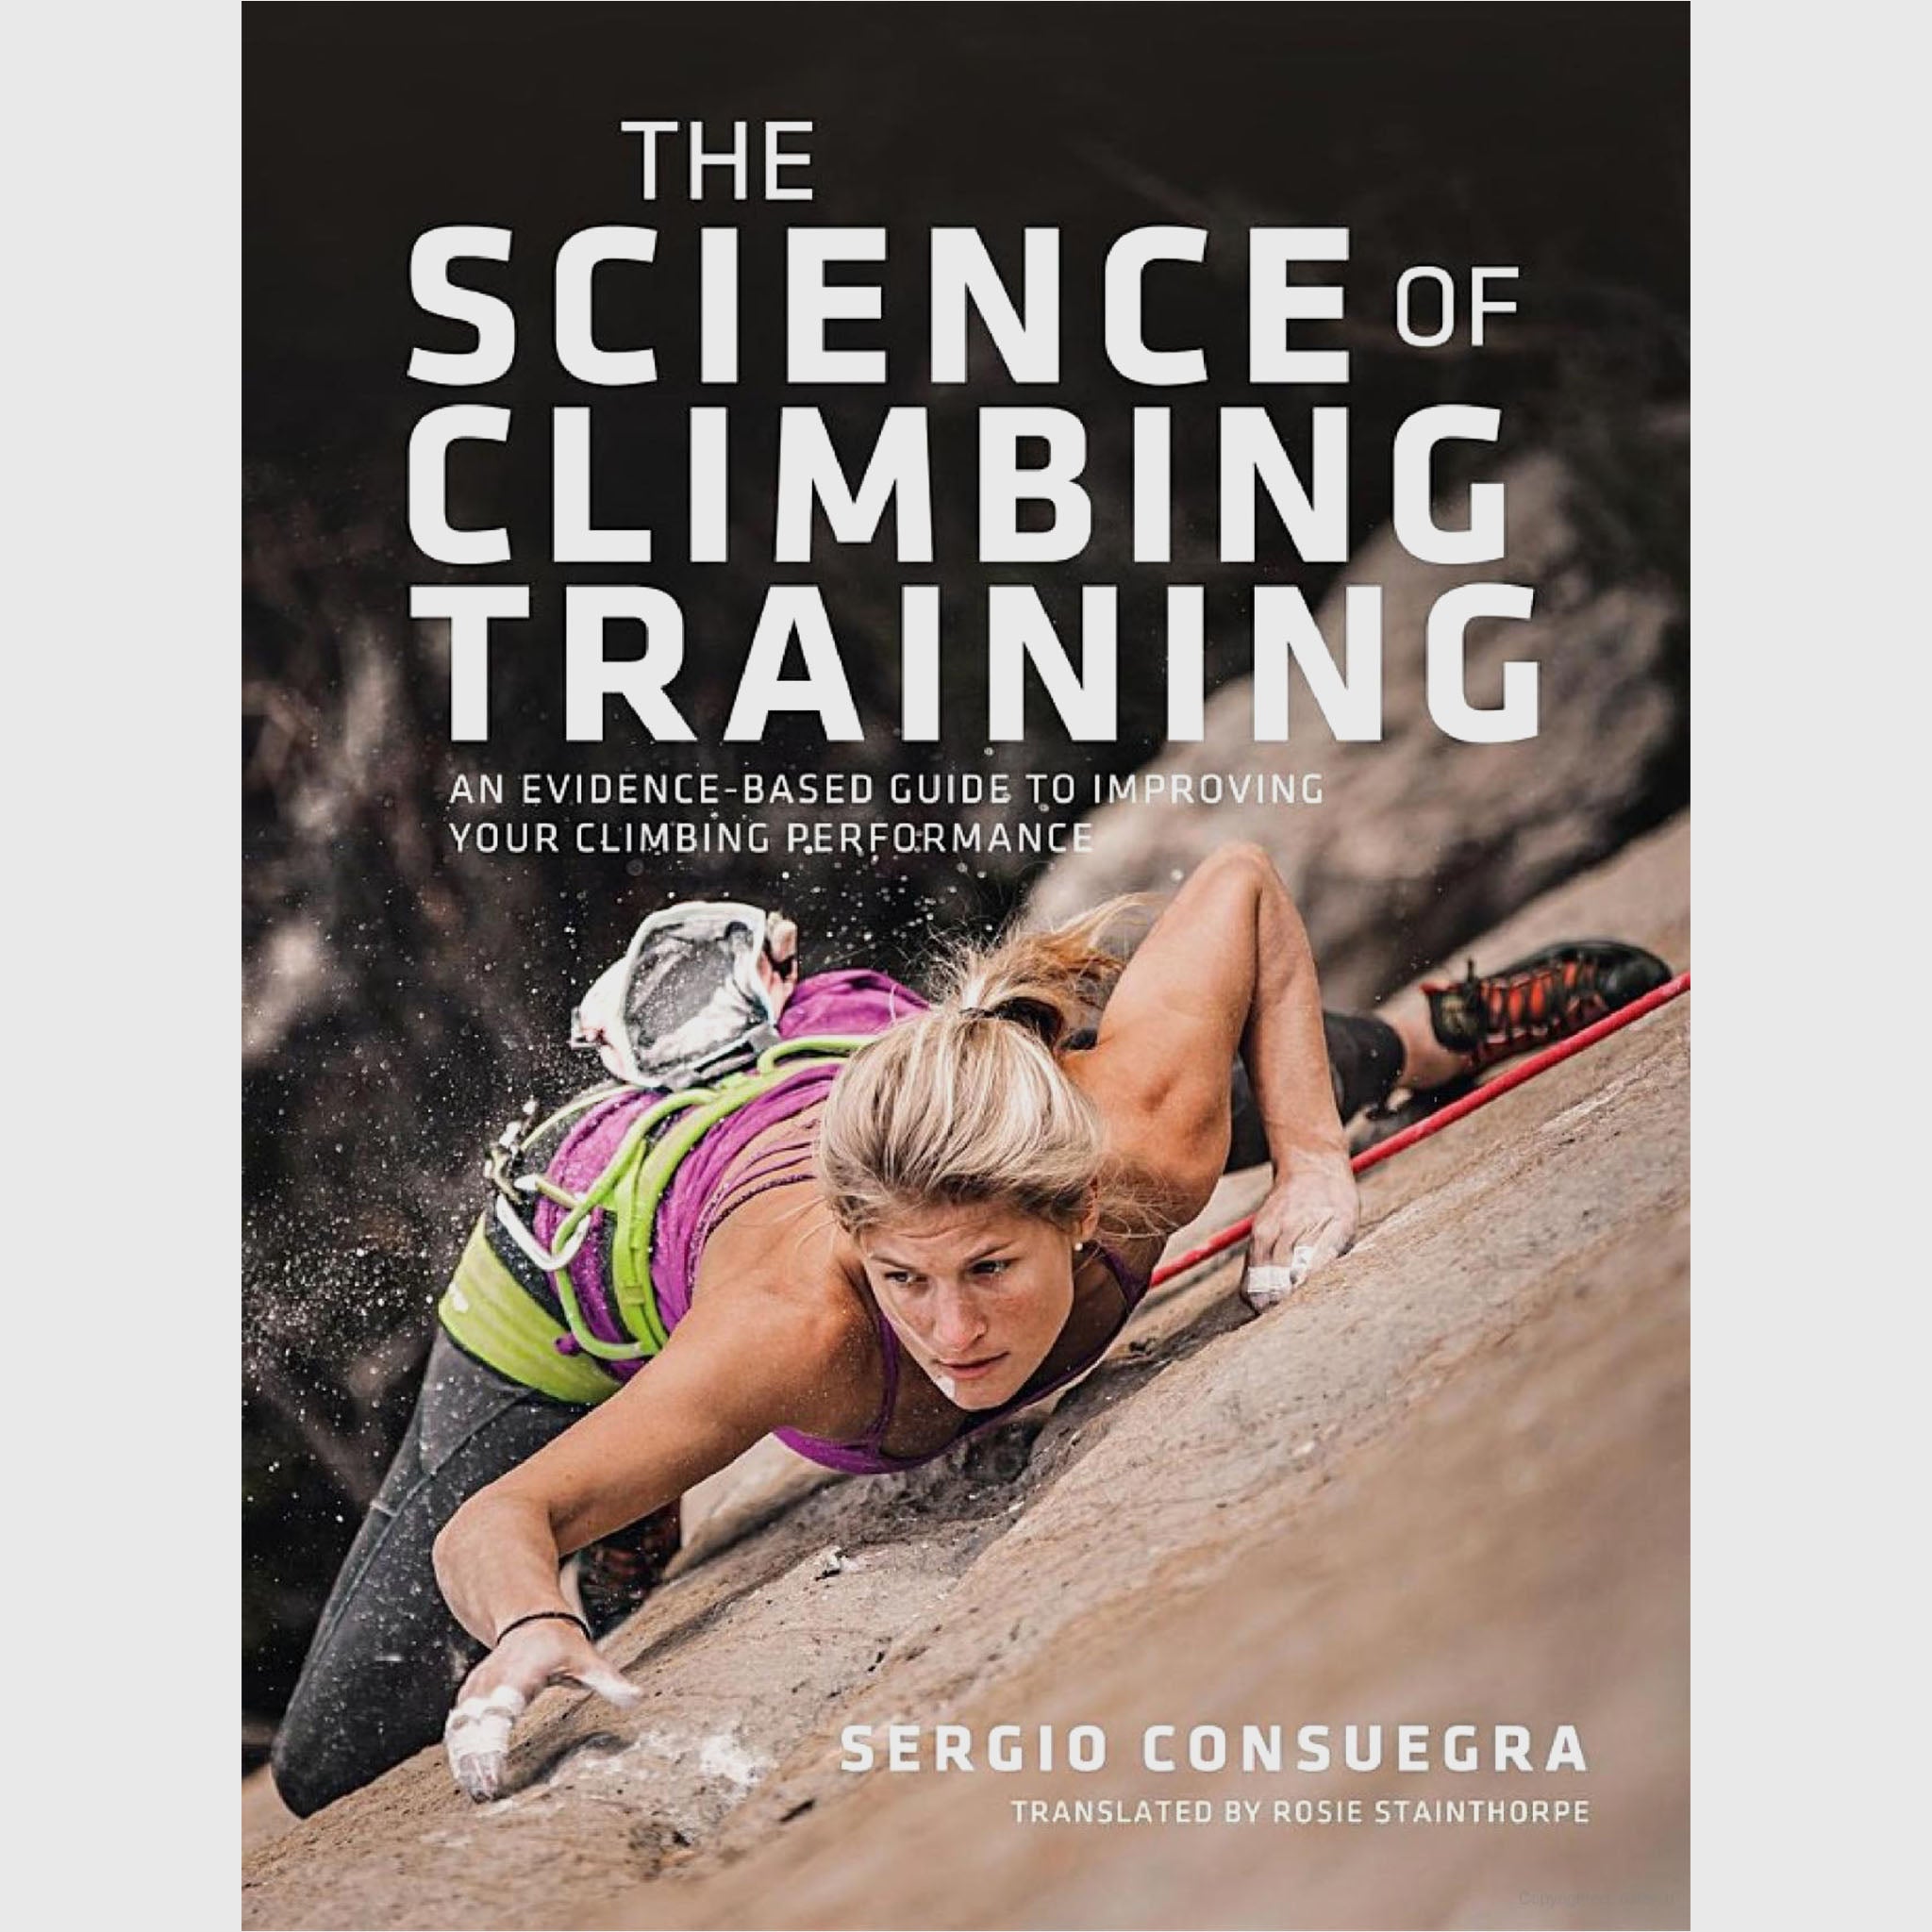 The Science of Climbing Training: An evidence-based guide to improving your climbing perfomance